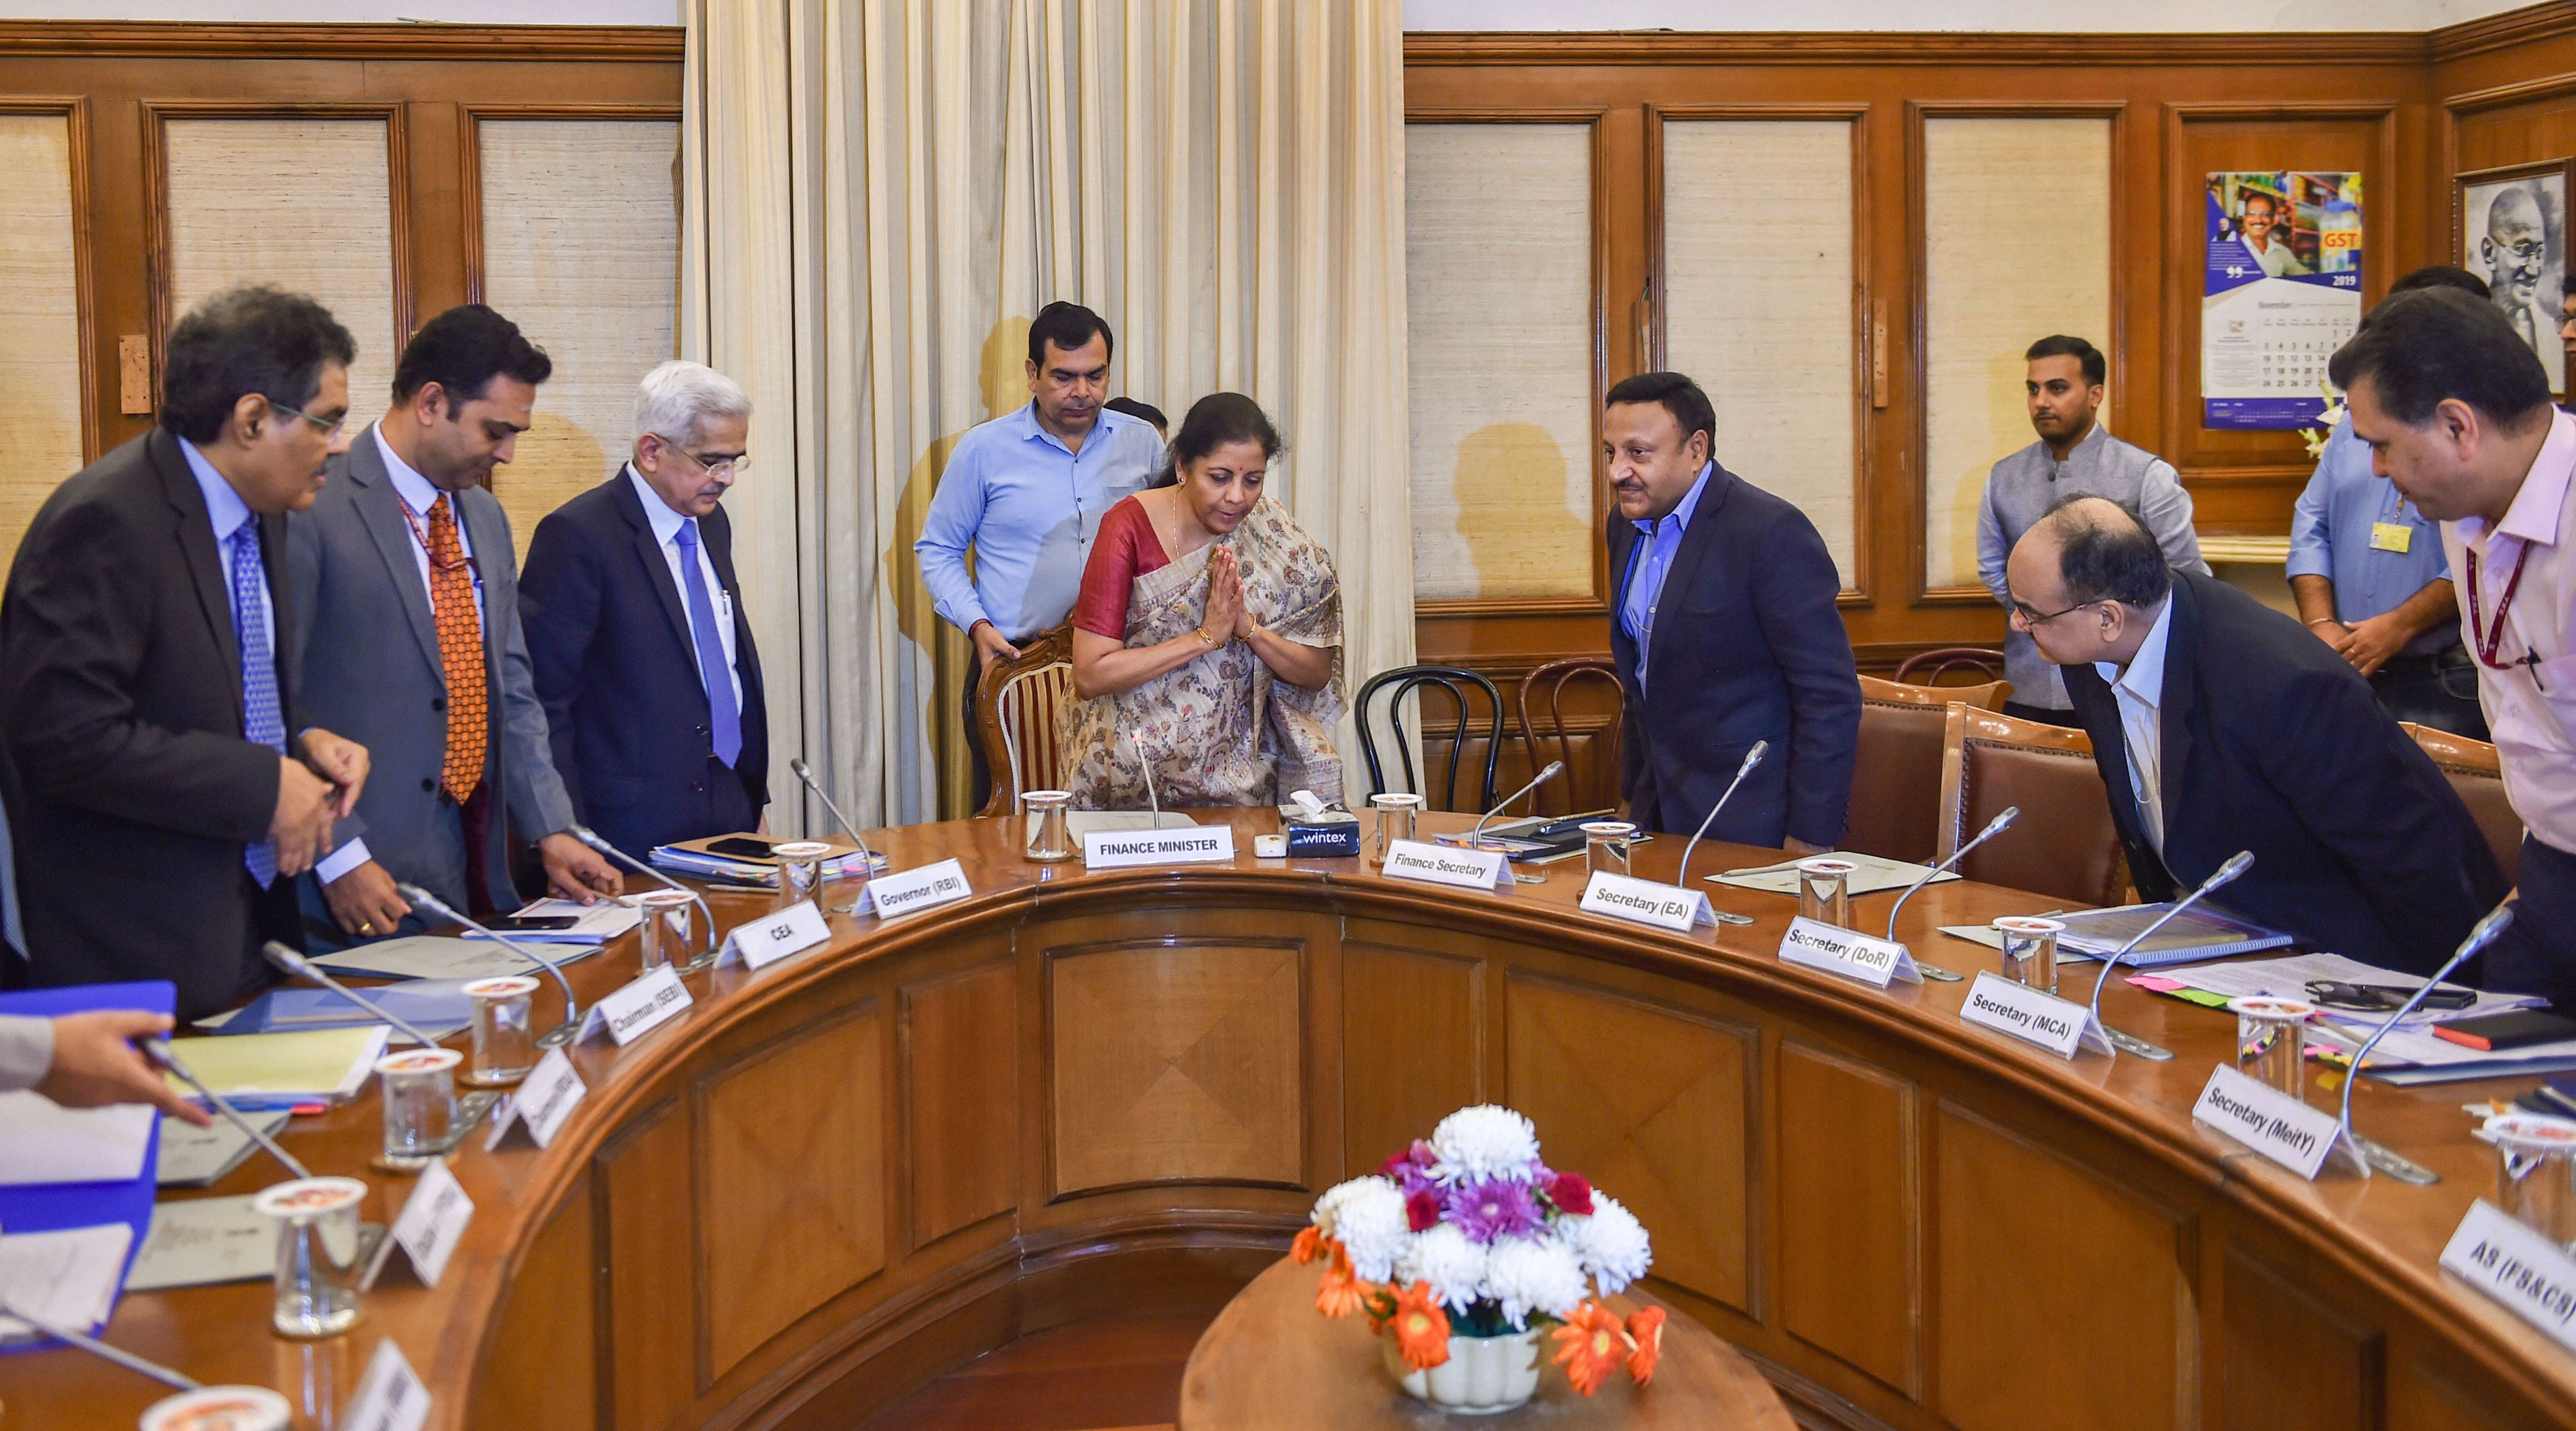 Finance Minister Nirmala Sitharaman (C) flanked by RBI Governor Shaktikanta Das (L), Finance Secretary Rajiv Kumar (R) and others during a meeting of the Financial Stability and Development Council (FSDC), in New Delhi - PTI